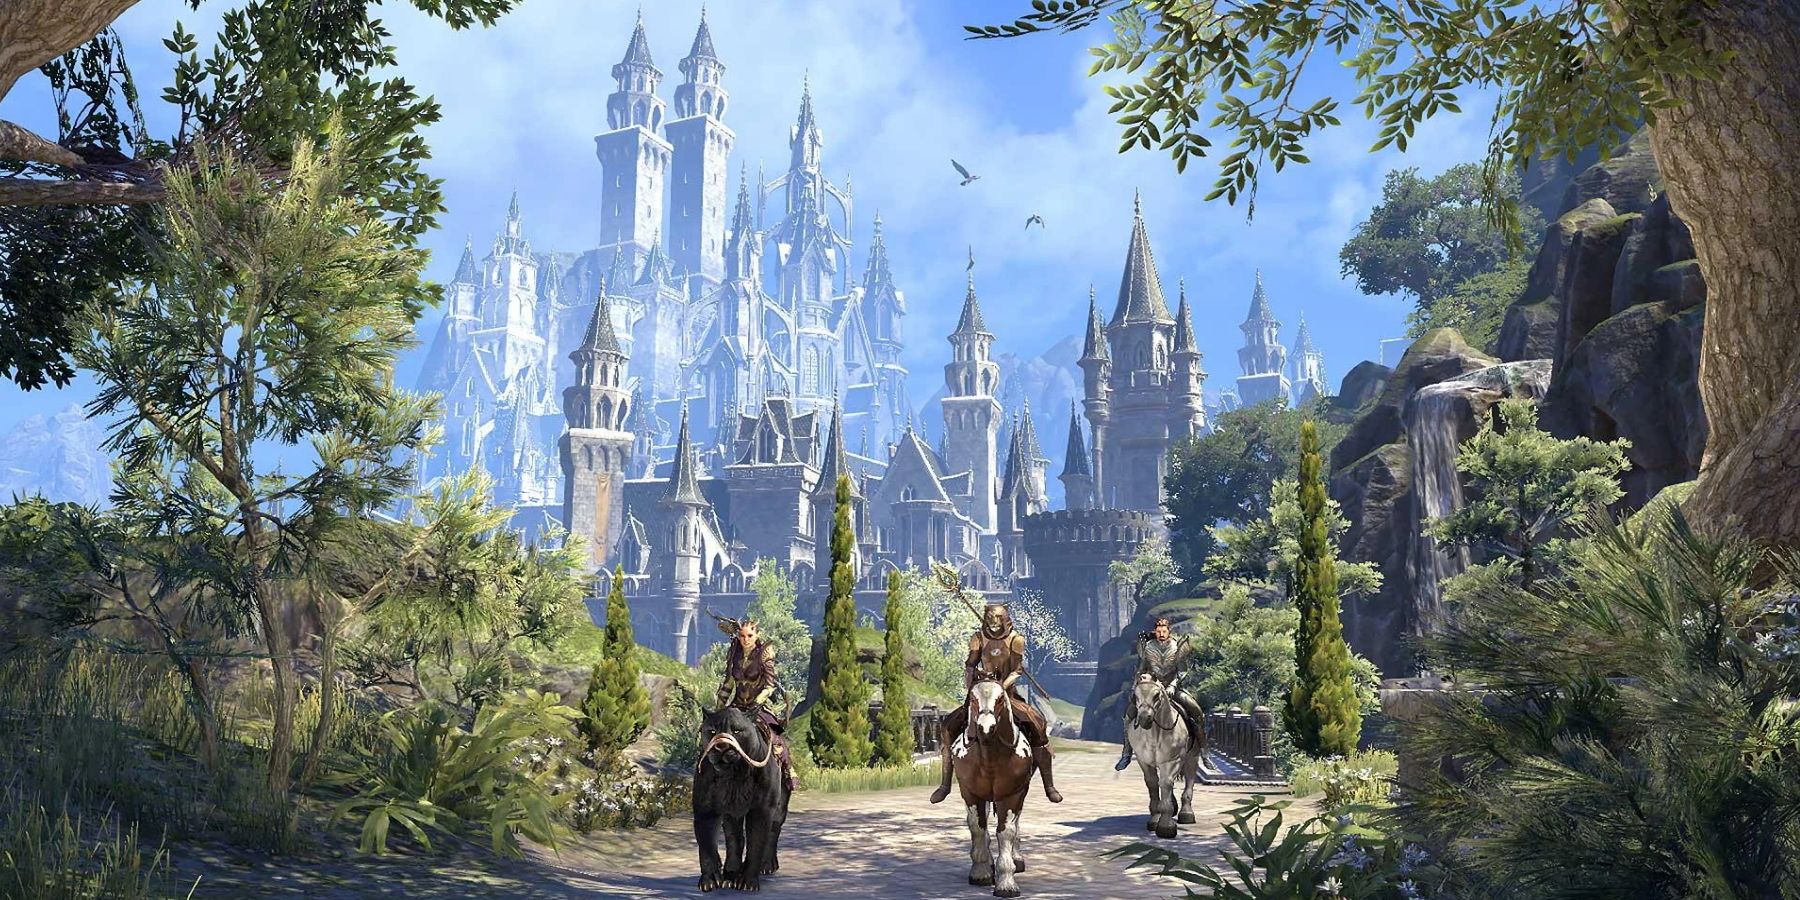 Characters on horseback riding away from castle